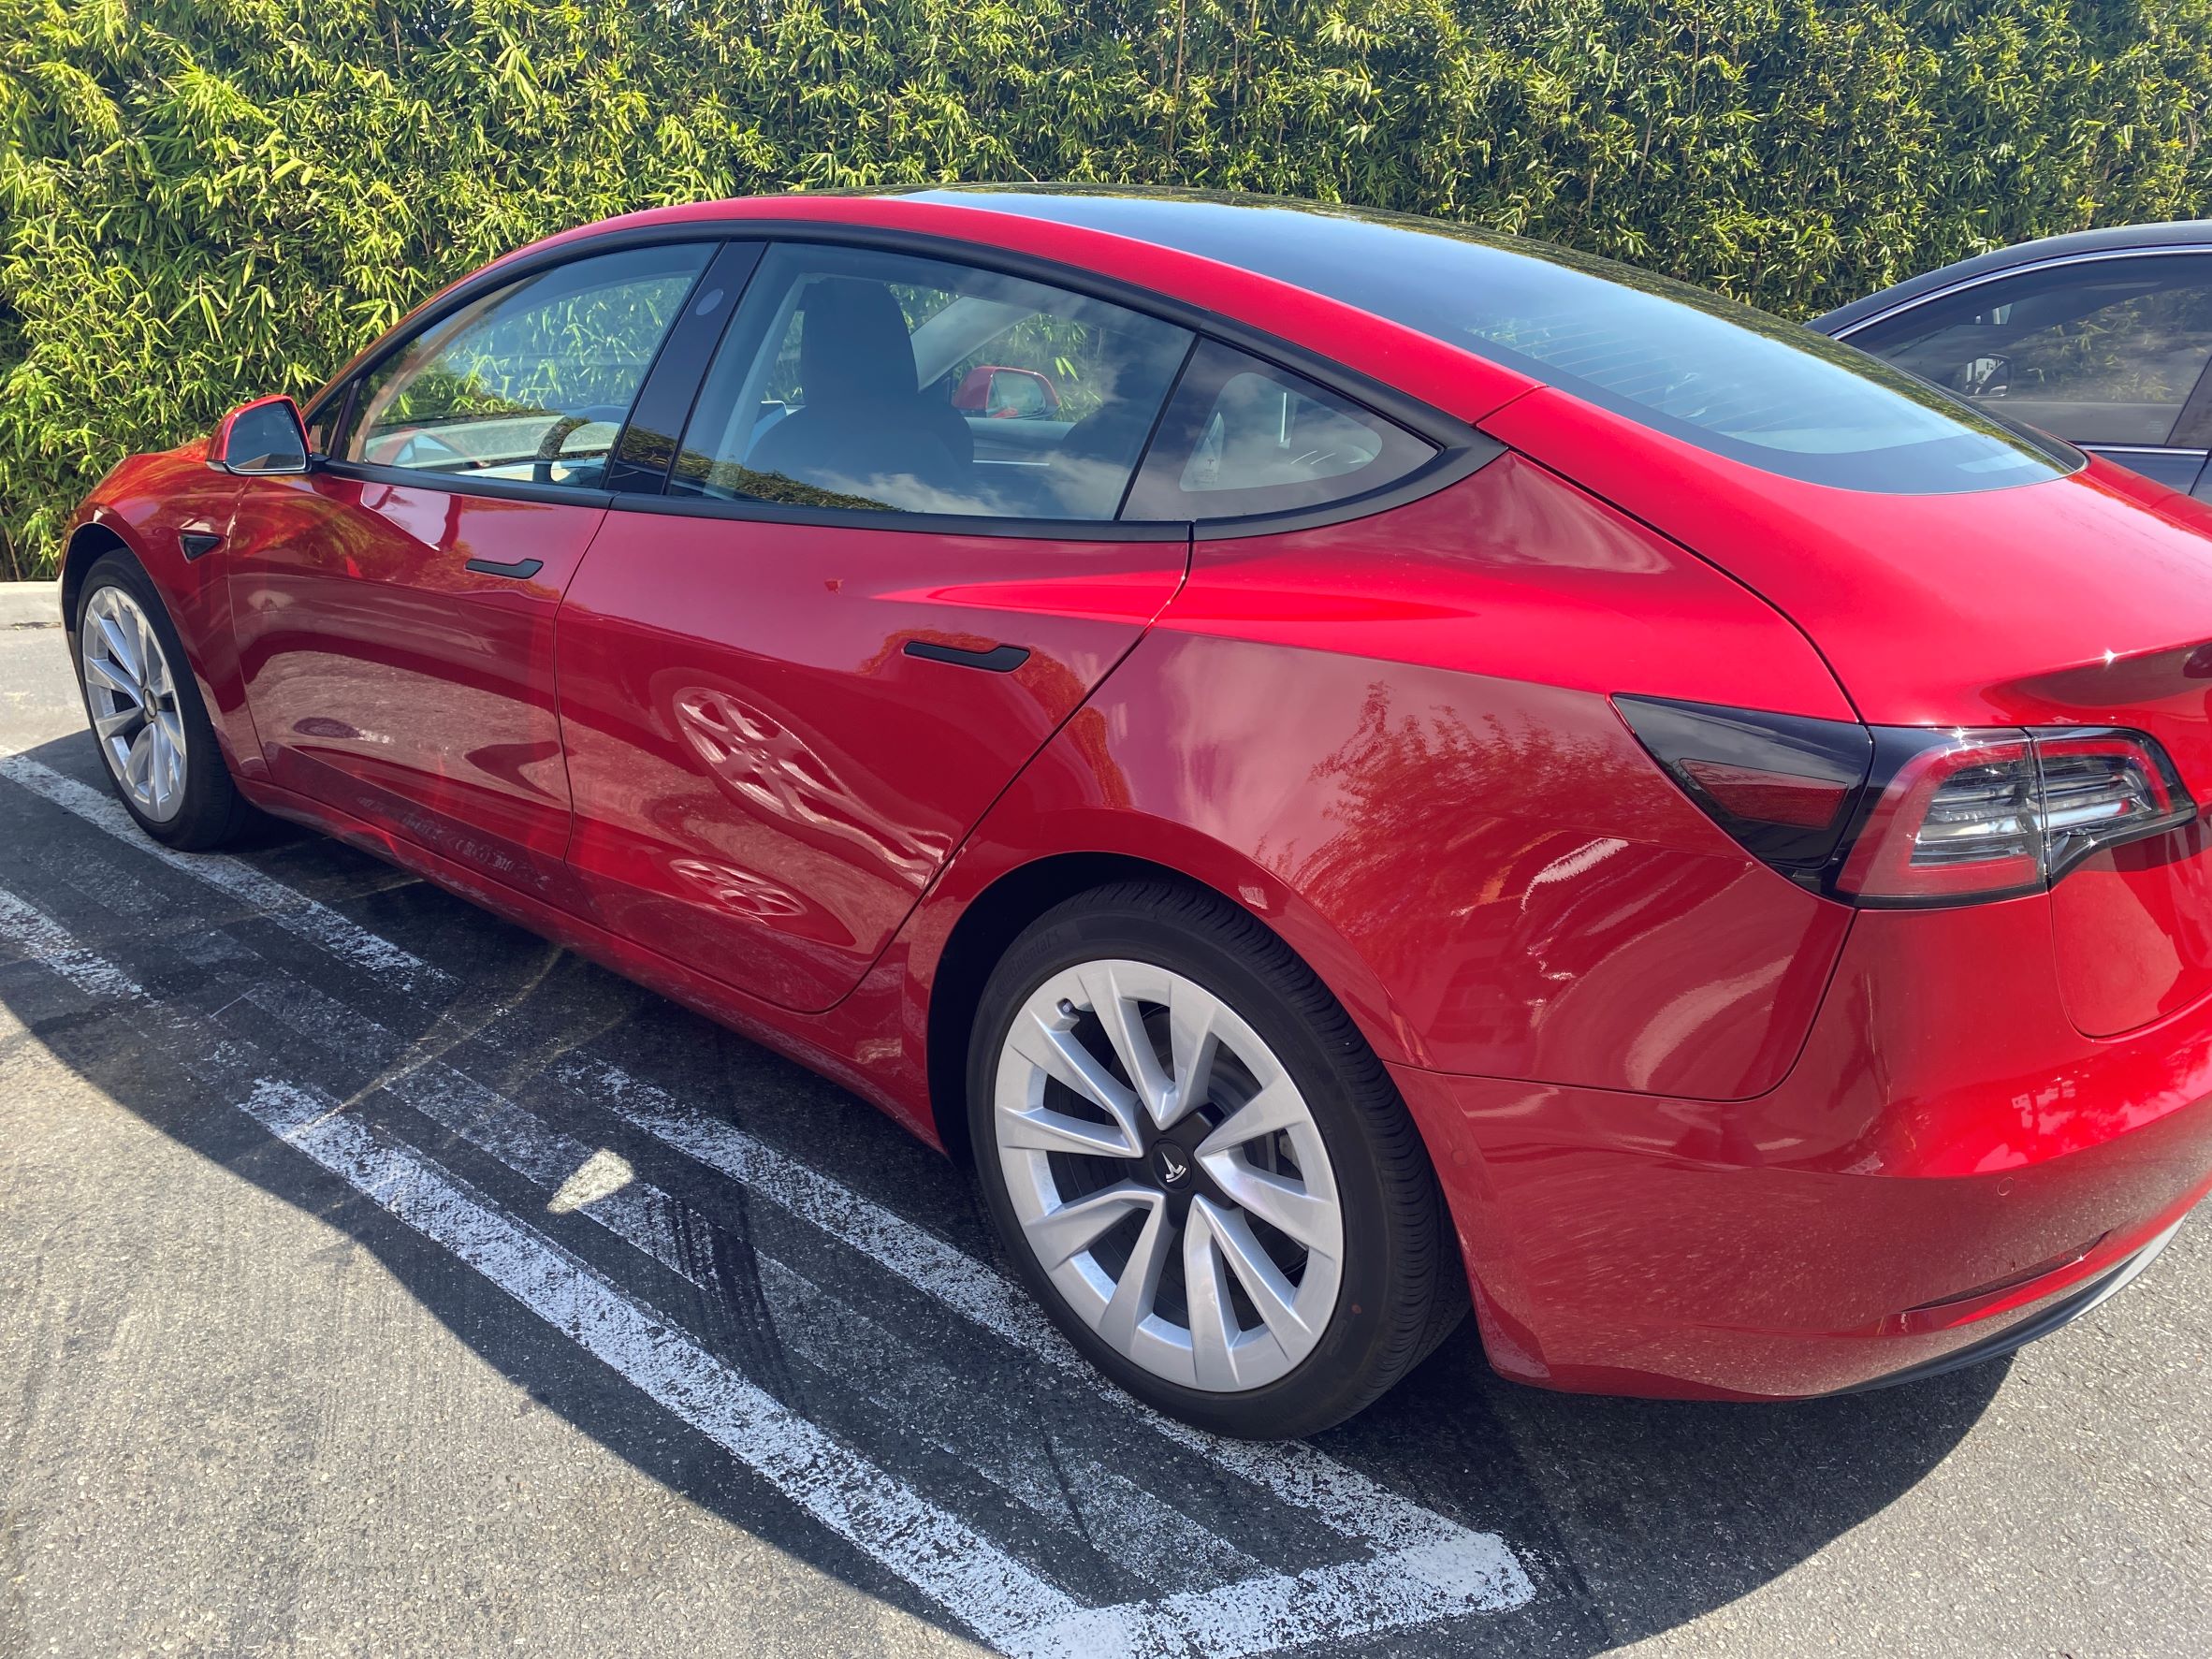 My Tale of Trying the Tesla